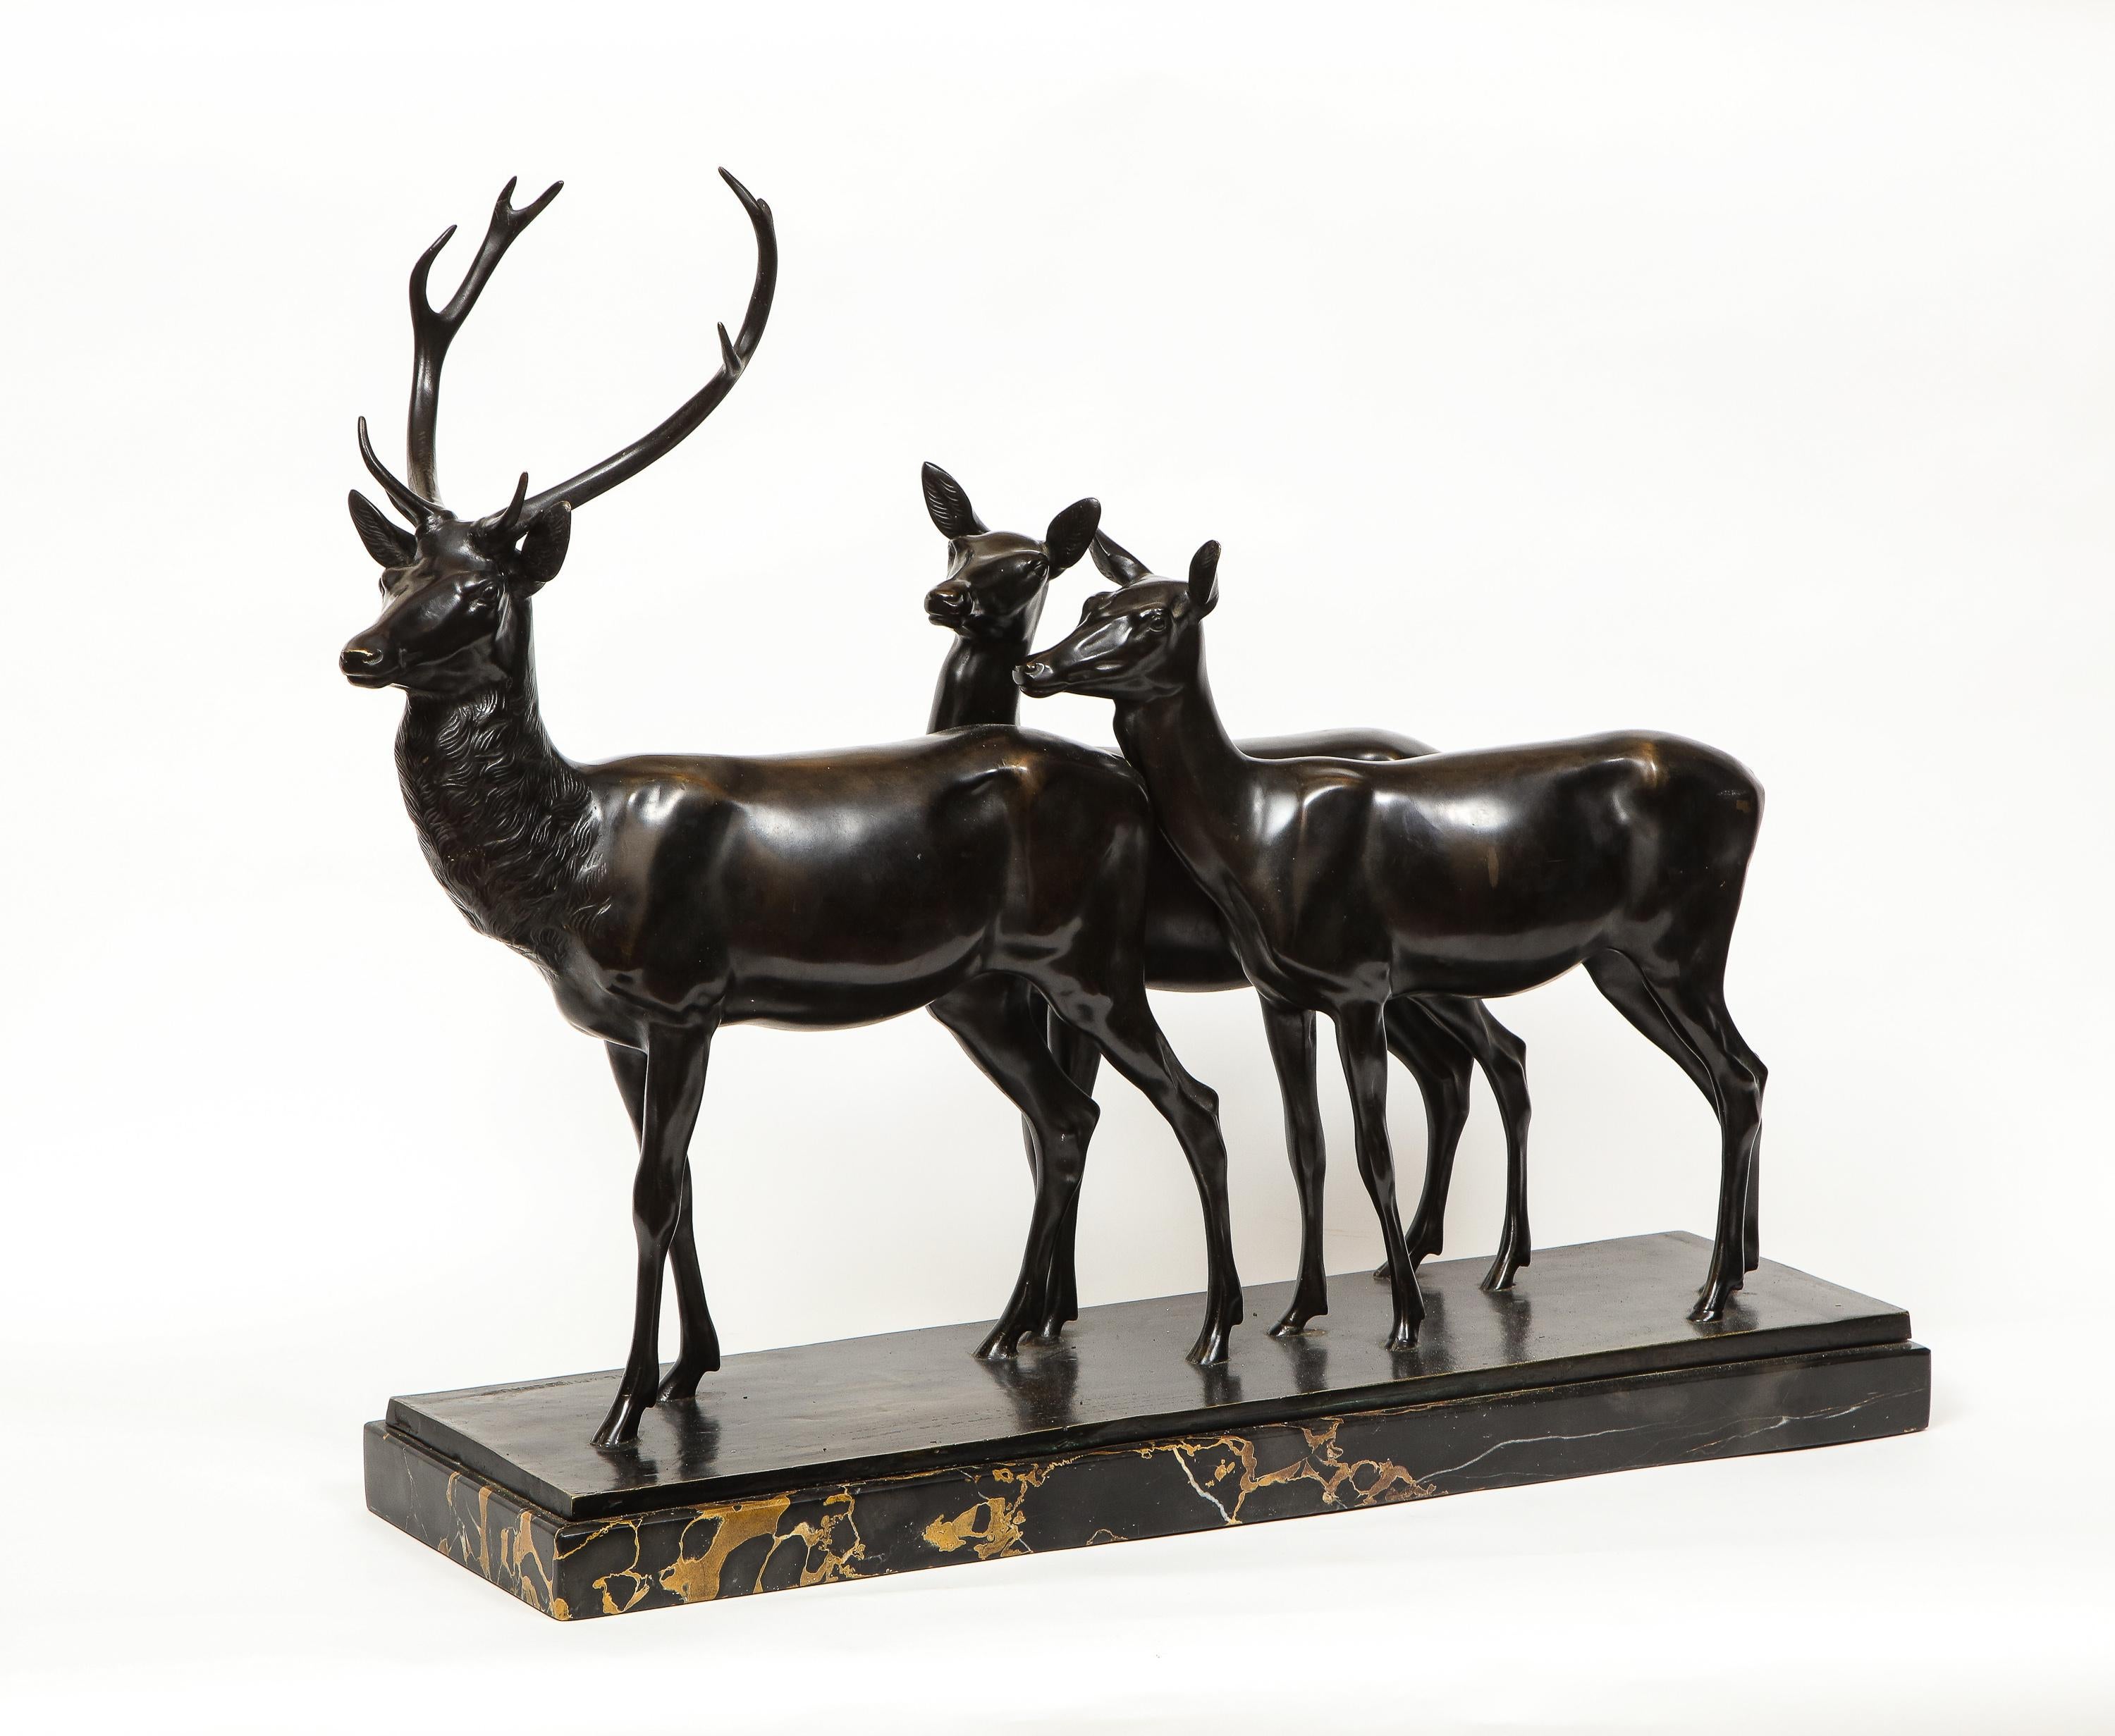 Heinrich Karl Scholz (Austria, 1880-1937) A Fine Art Deco Patinated Bronze Group of Deer, depicting a stag and his two doe's, circa 1925

This magnificent sculpture is extremely chic and decorative. The subject and quality are very appealing to